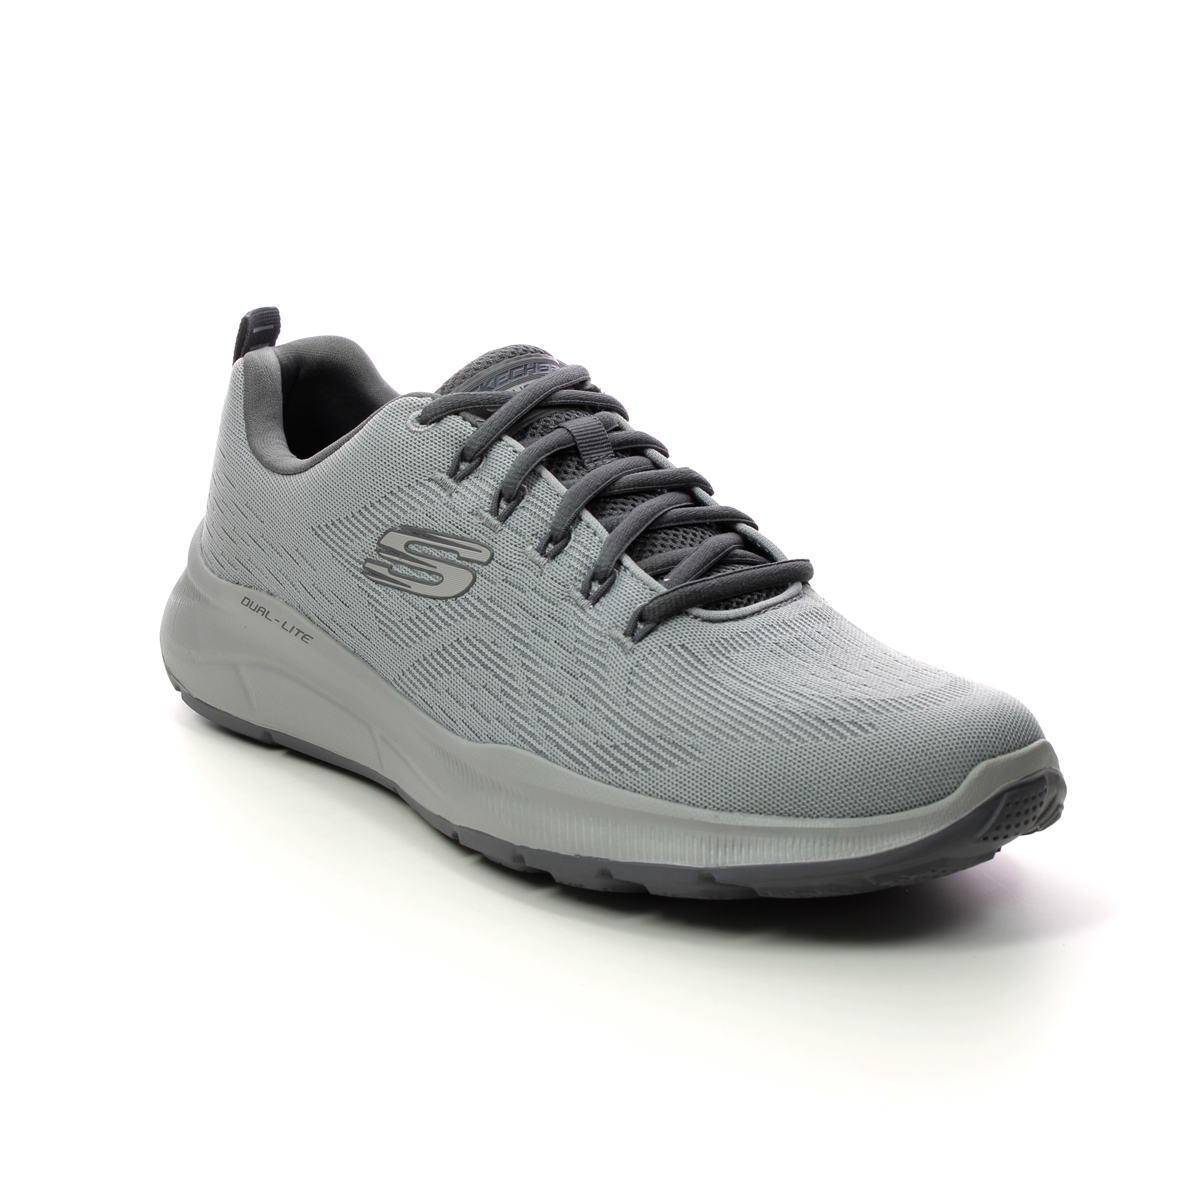 Skechers Equalizer 5 Grey Charcoal Mens Trainers 232519 In Size 12 In Plain Grey Charcoal